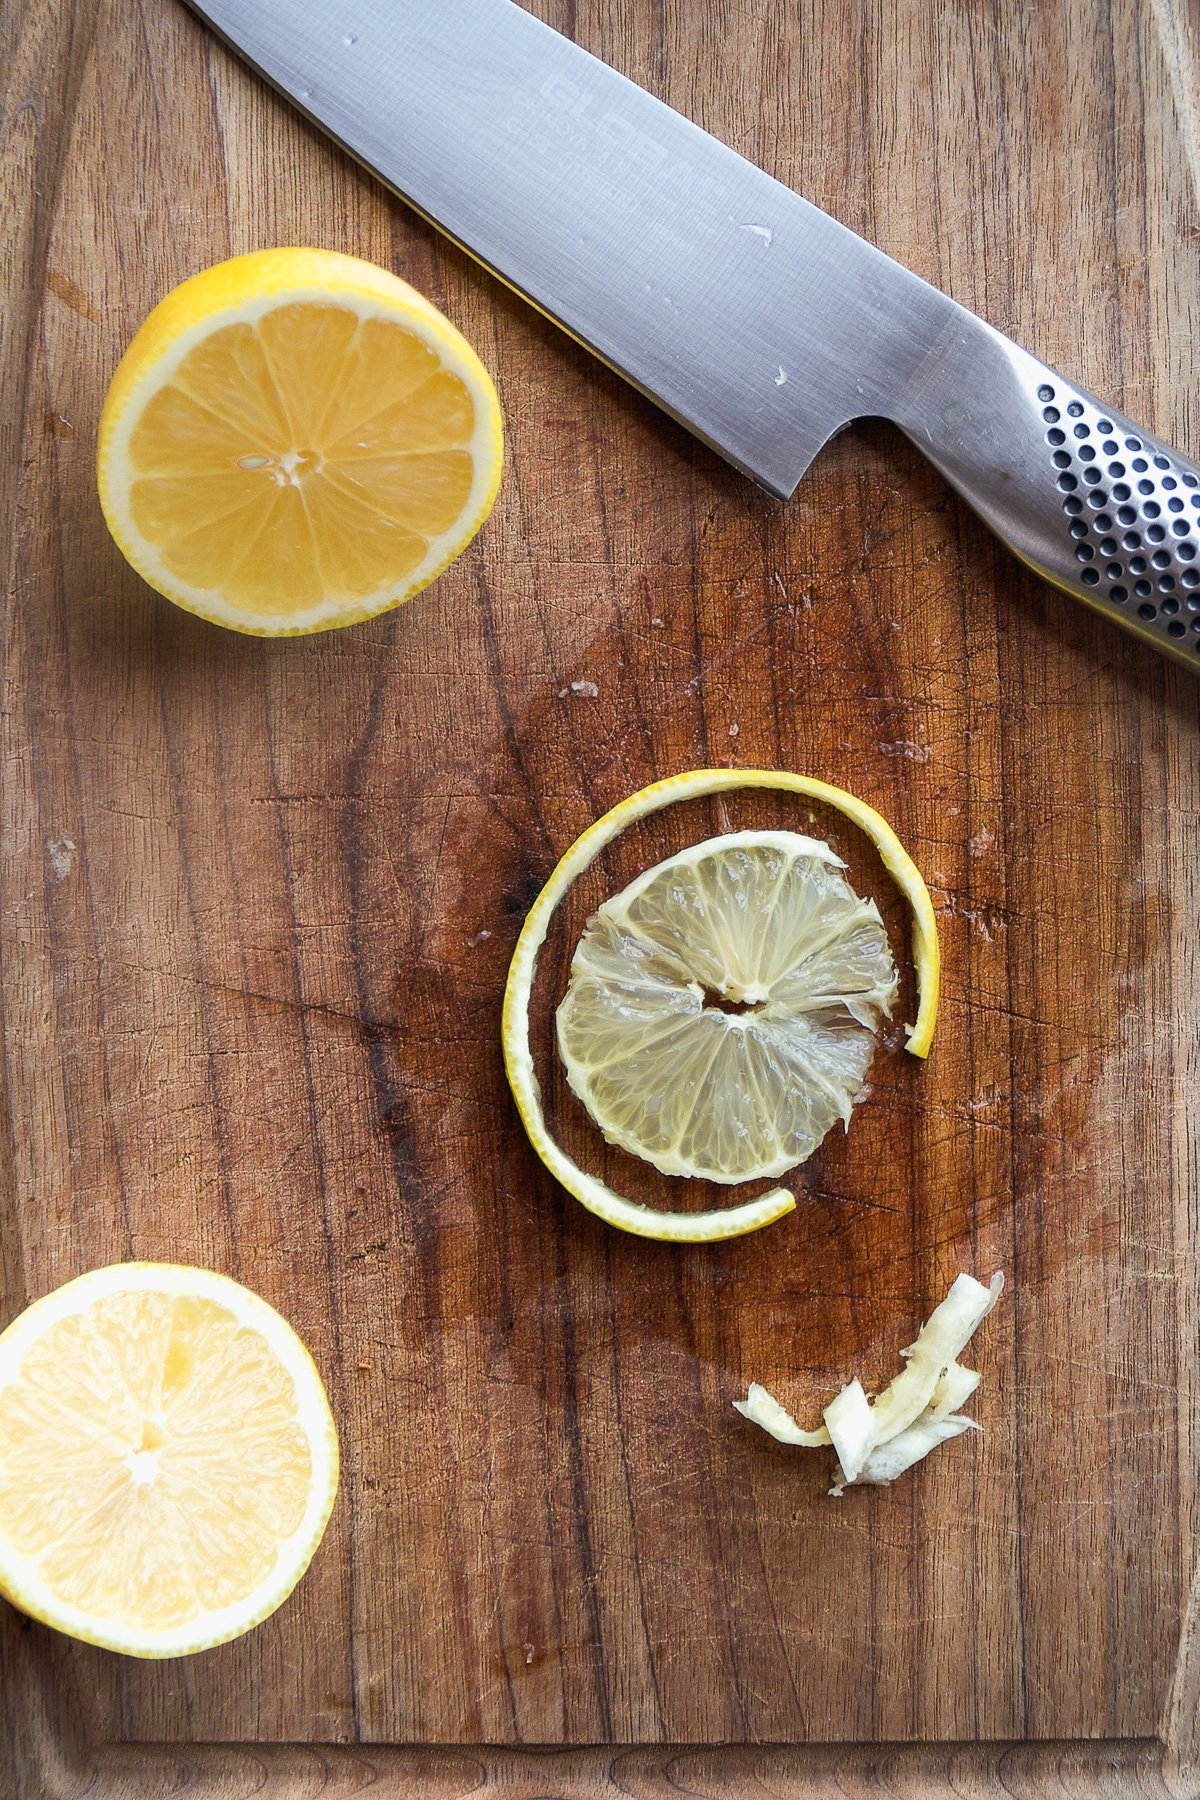 Lemon slice on a wooden cutting board with the rind cut off.